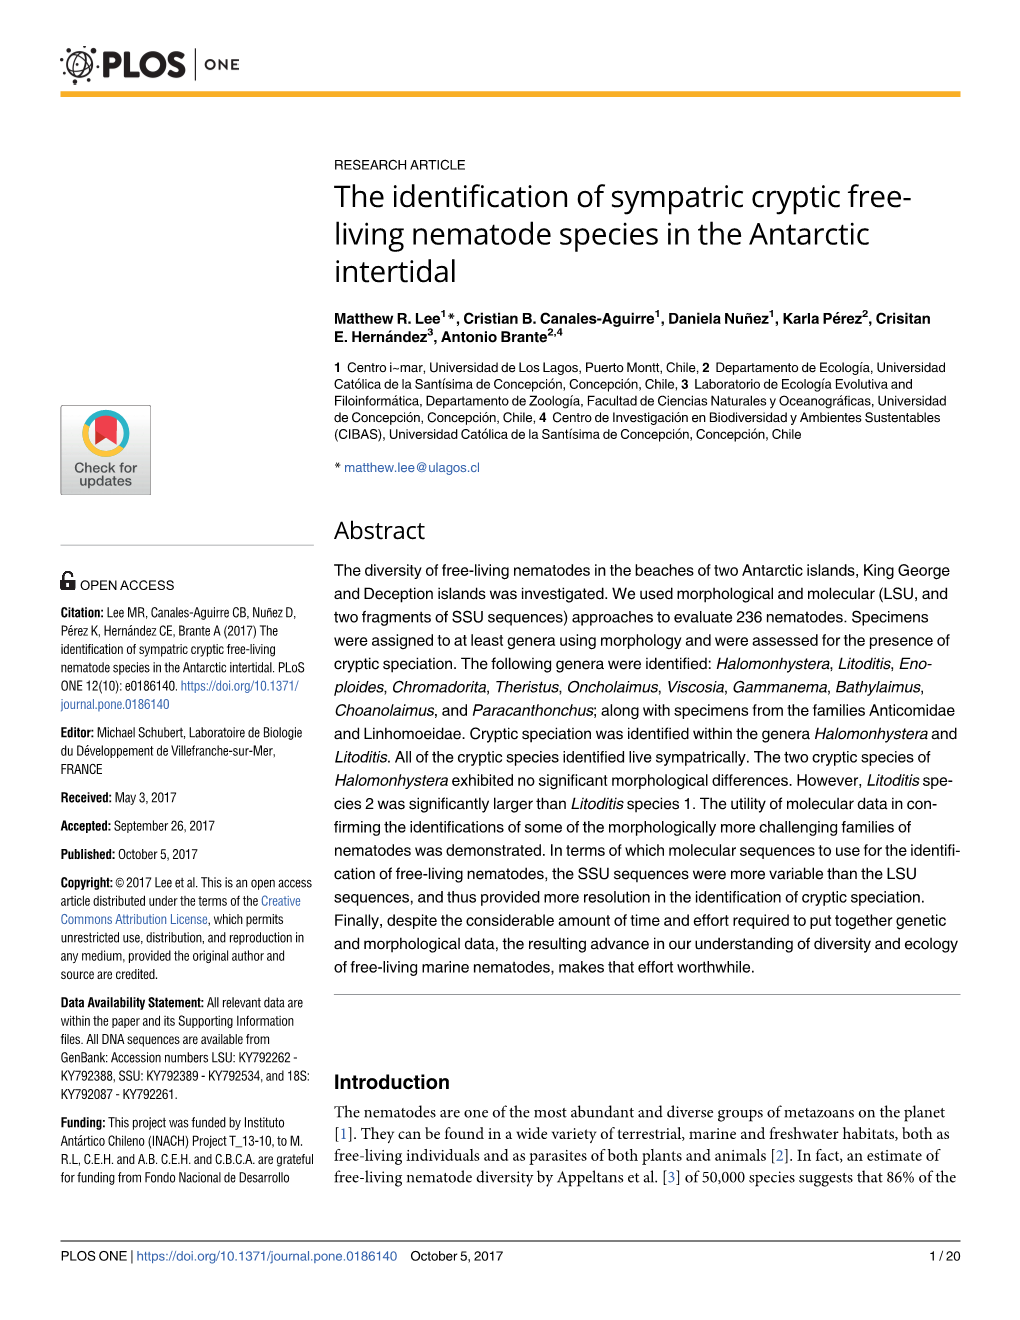 The Identification of Sympatric Cryptic Free-Living Nematode Species in The